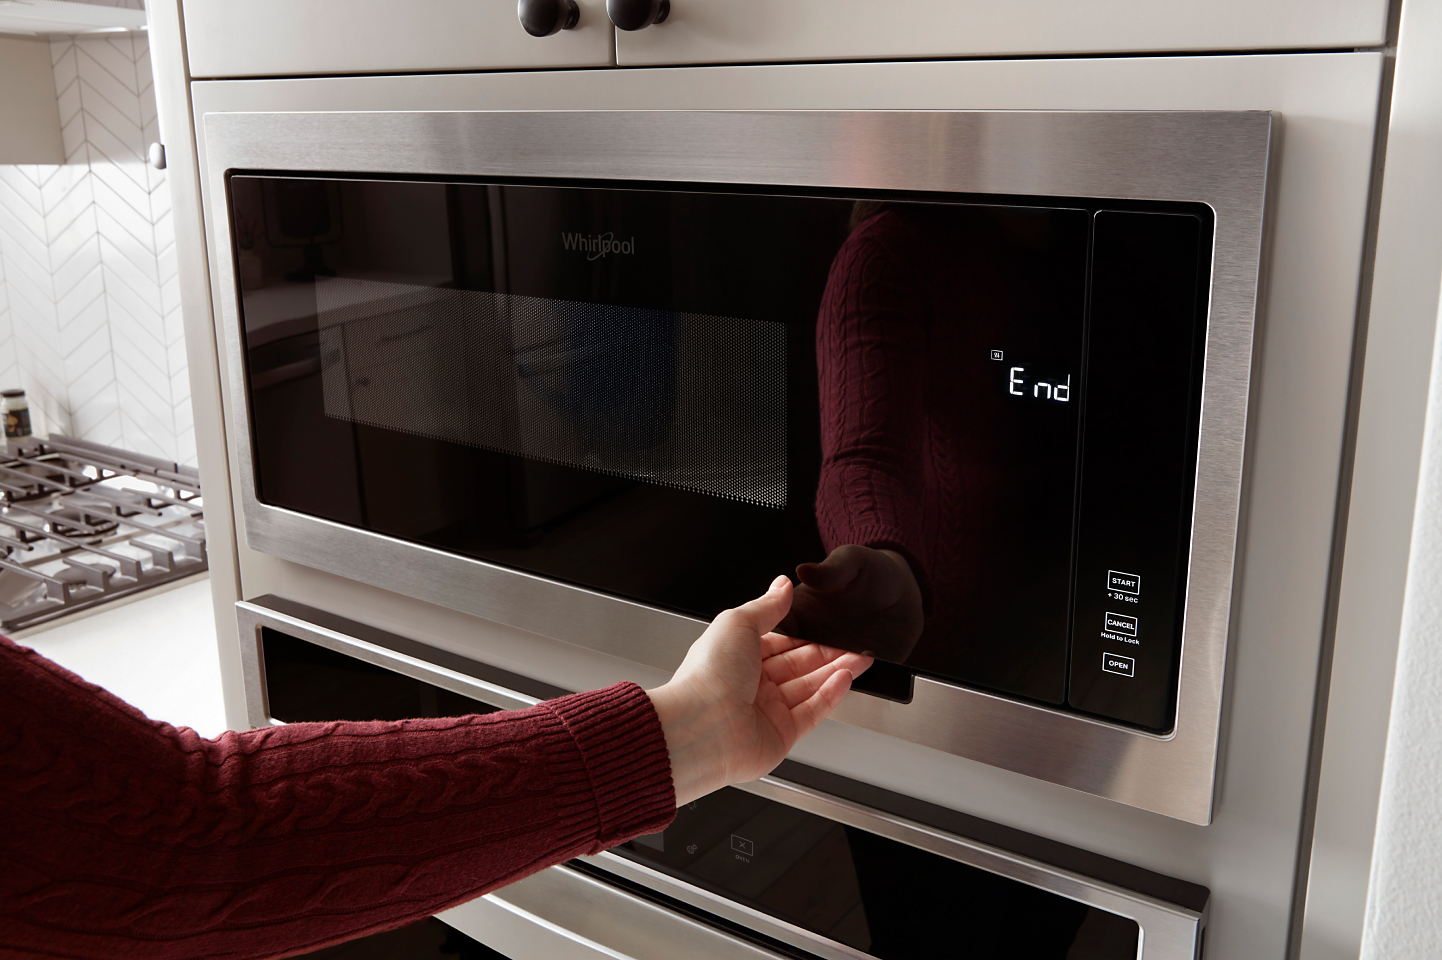 This microwave oven could fit under a desk